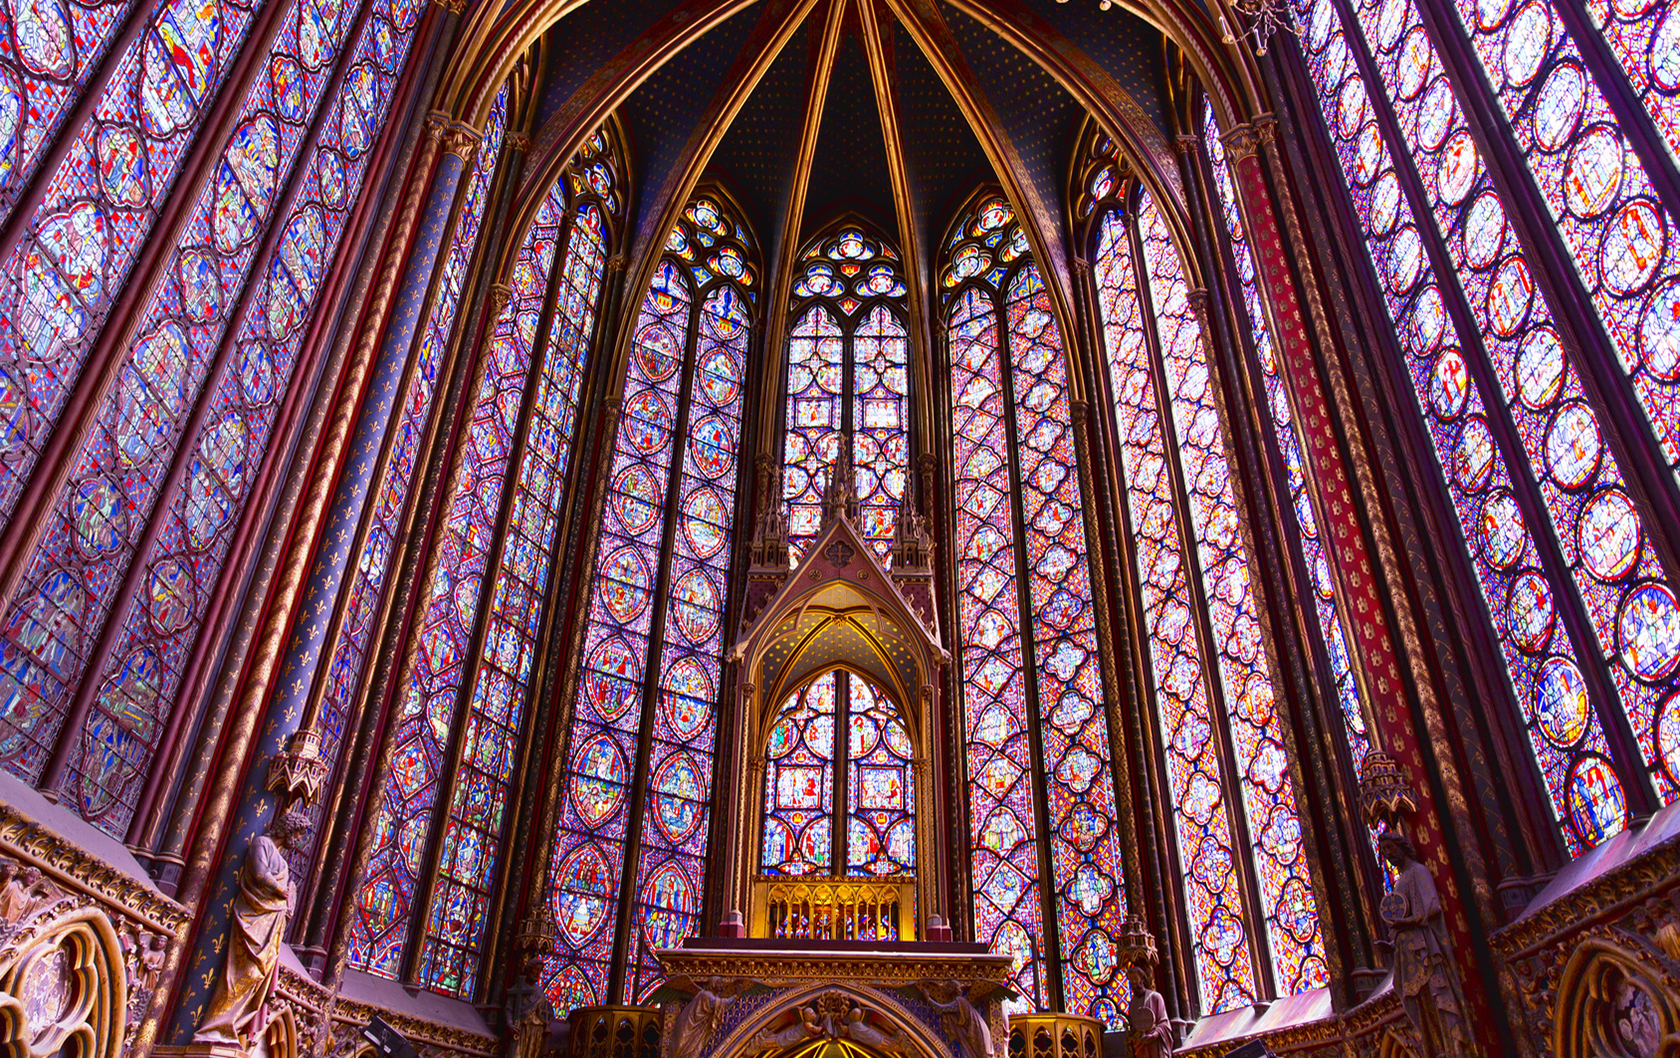 Stained glass at Sainte-Chapelle